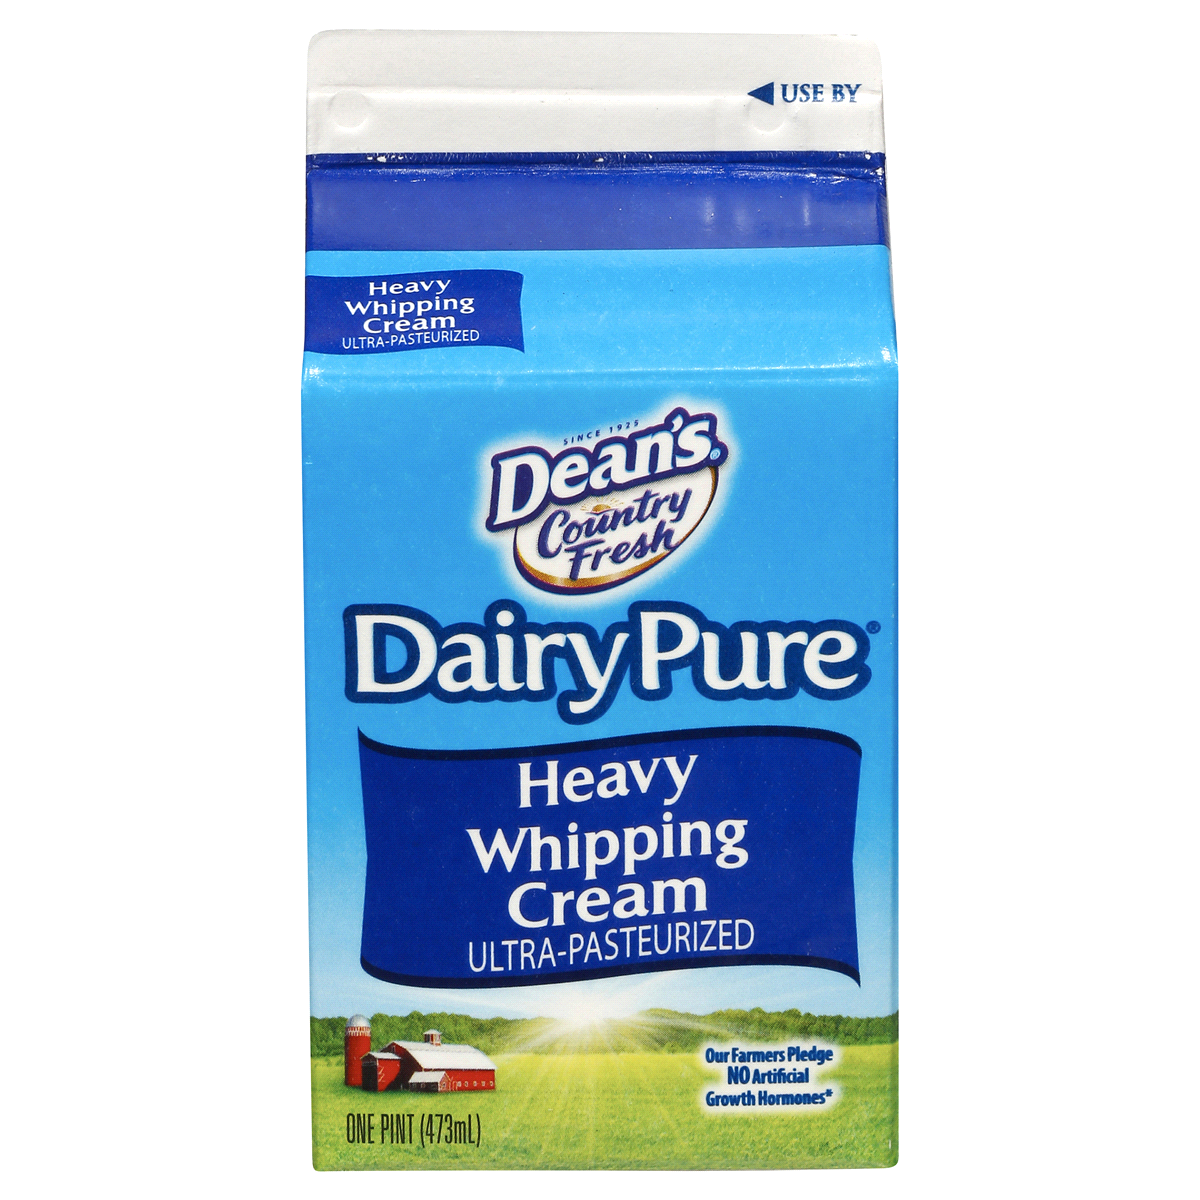 slide 2 of 6, Dairy Pure Heavy Whipping Cream, 1 pint